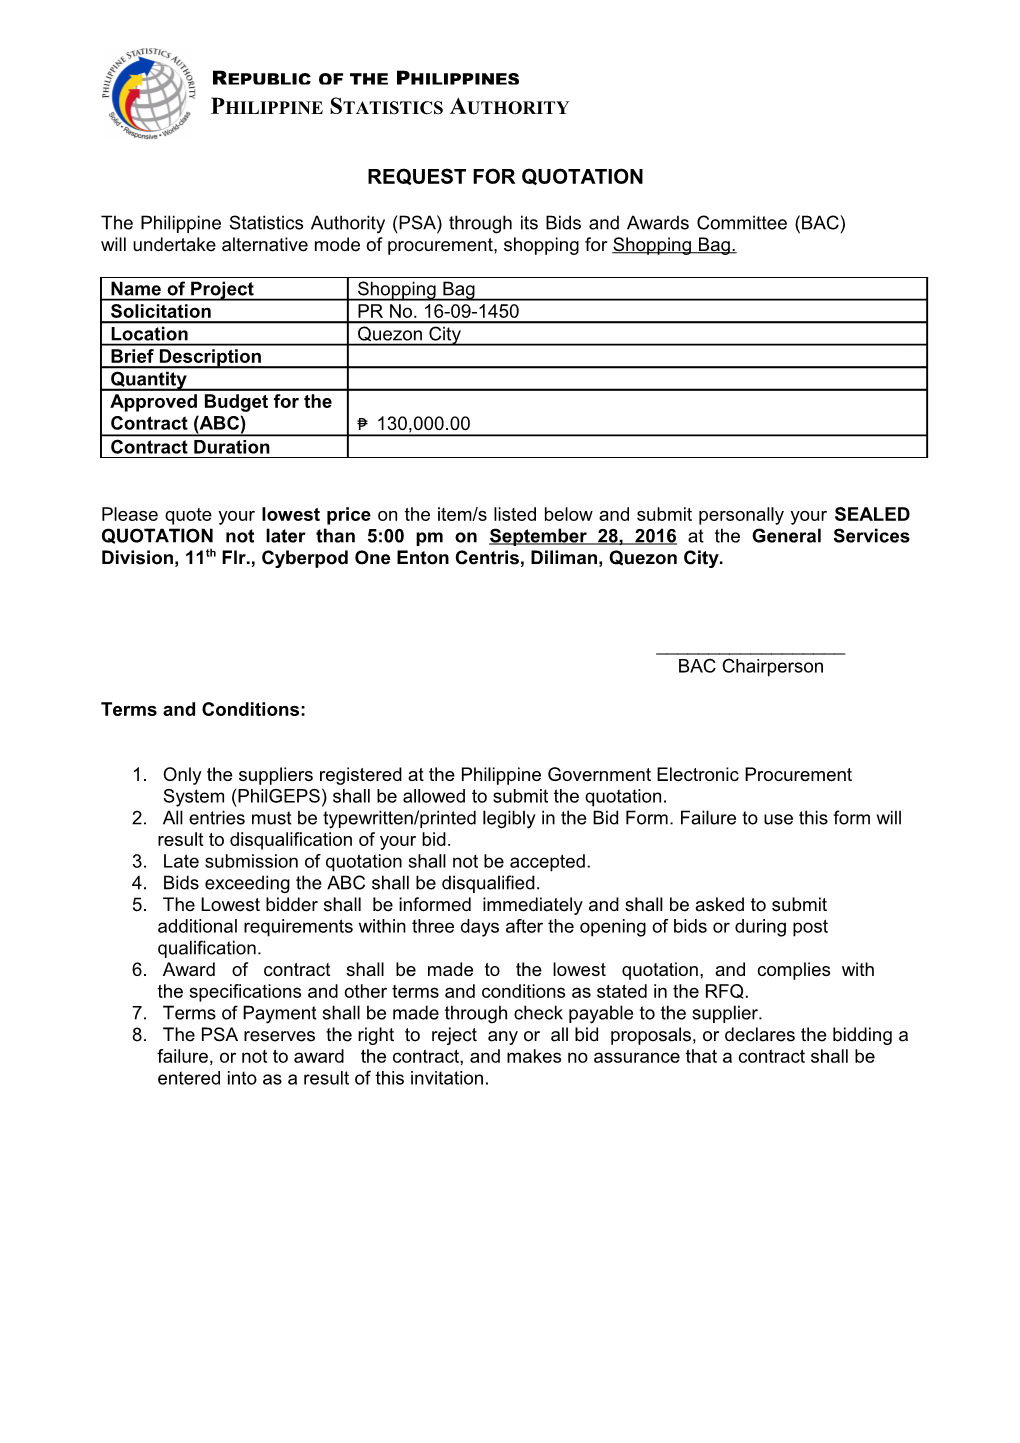 Request for Quotation s14